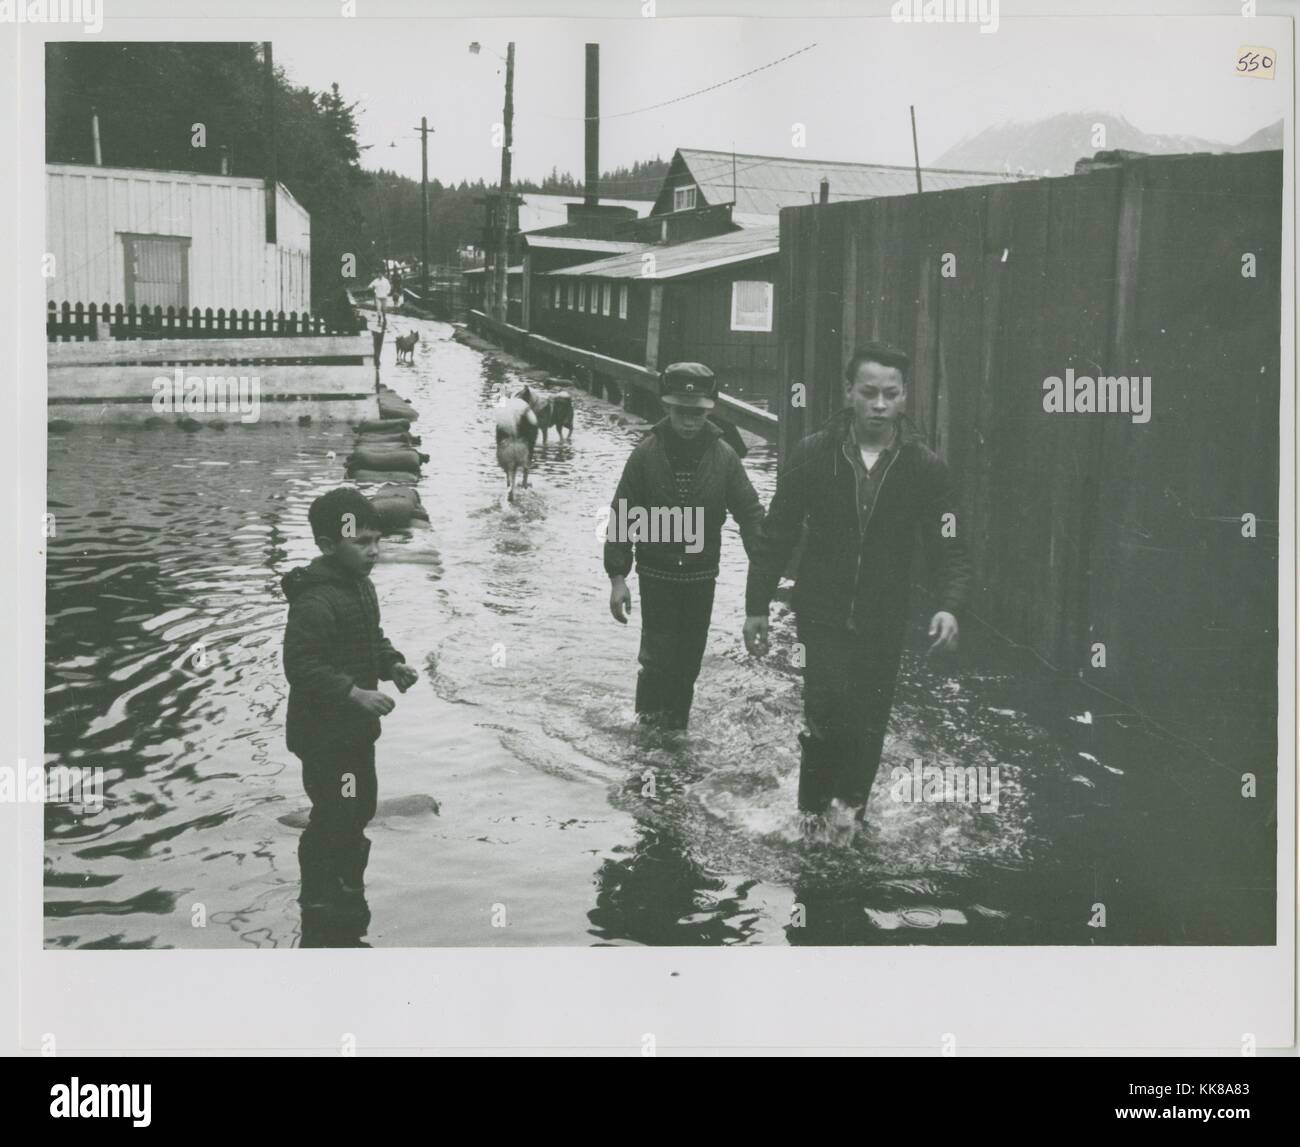 Seldovia flooding, with townspeople walking through ankle deep water, Alaska Earthquake Photographs, Image credit Department of Defense, 1964. Stock Photo